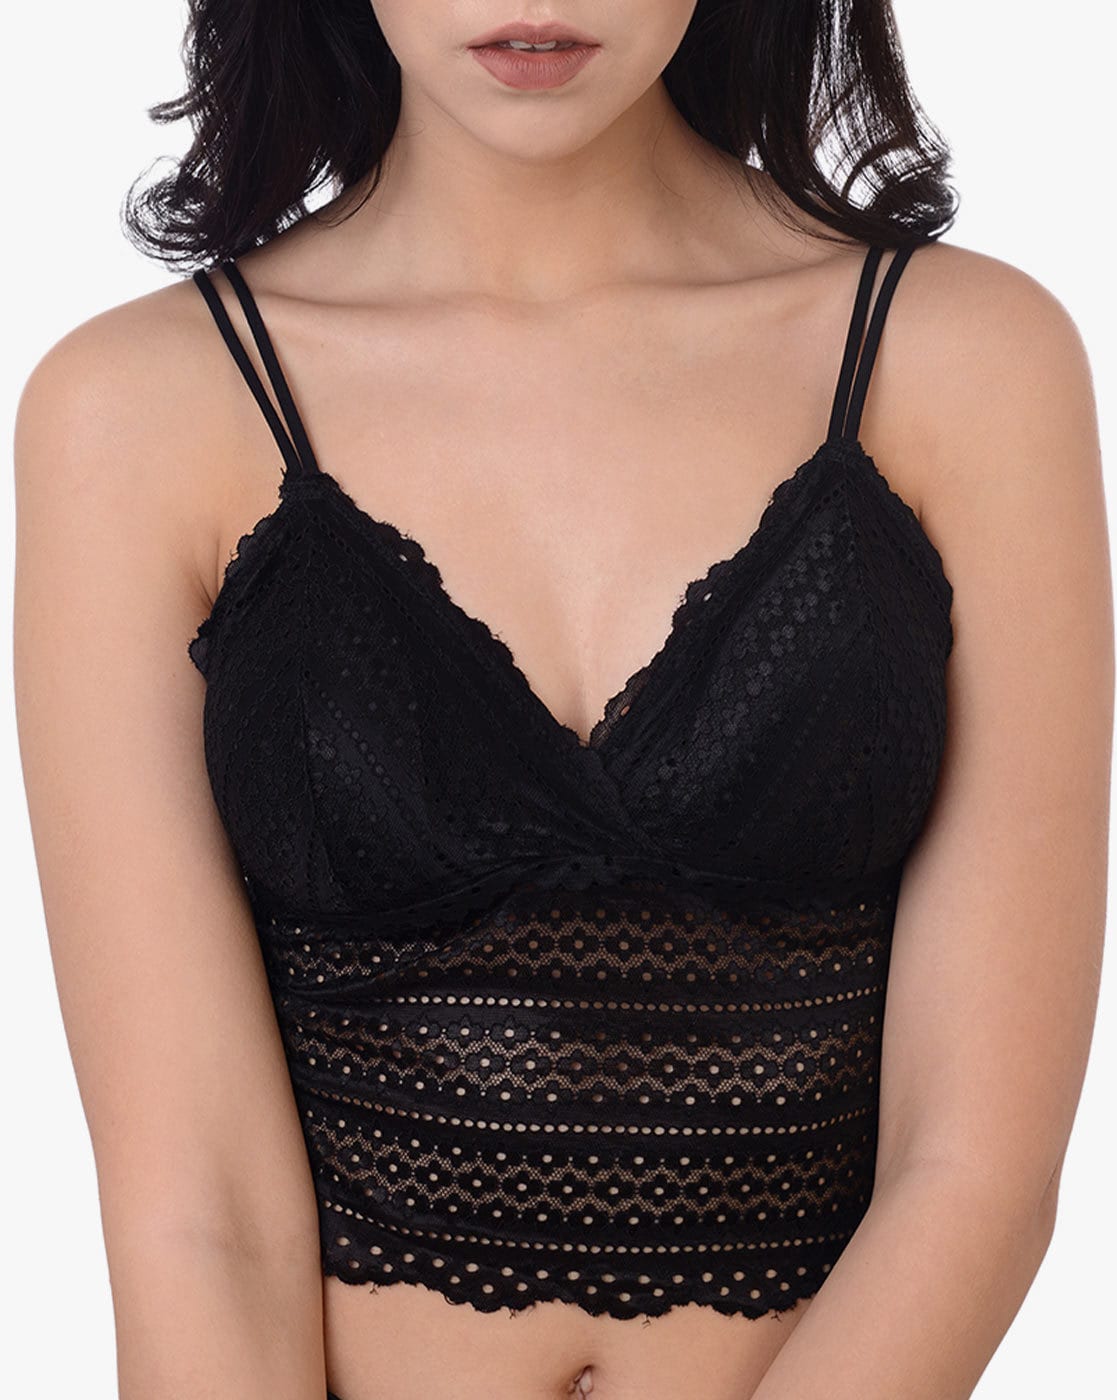 What is a camisole bra? - Quora